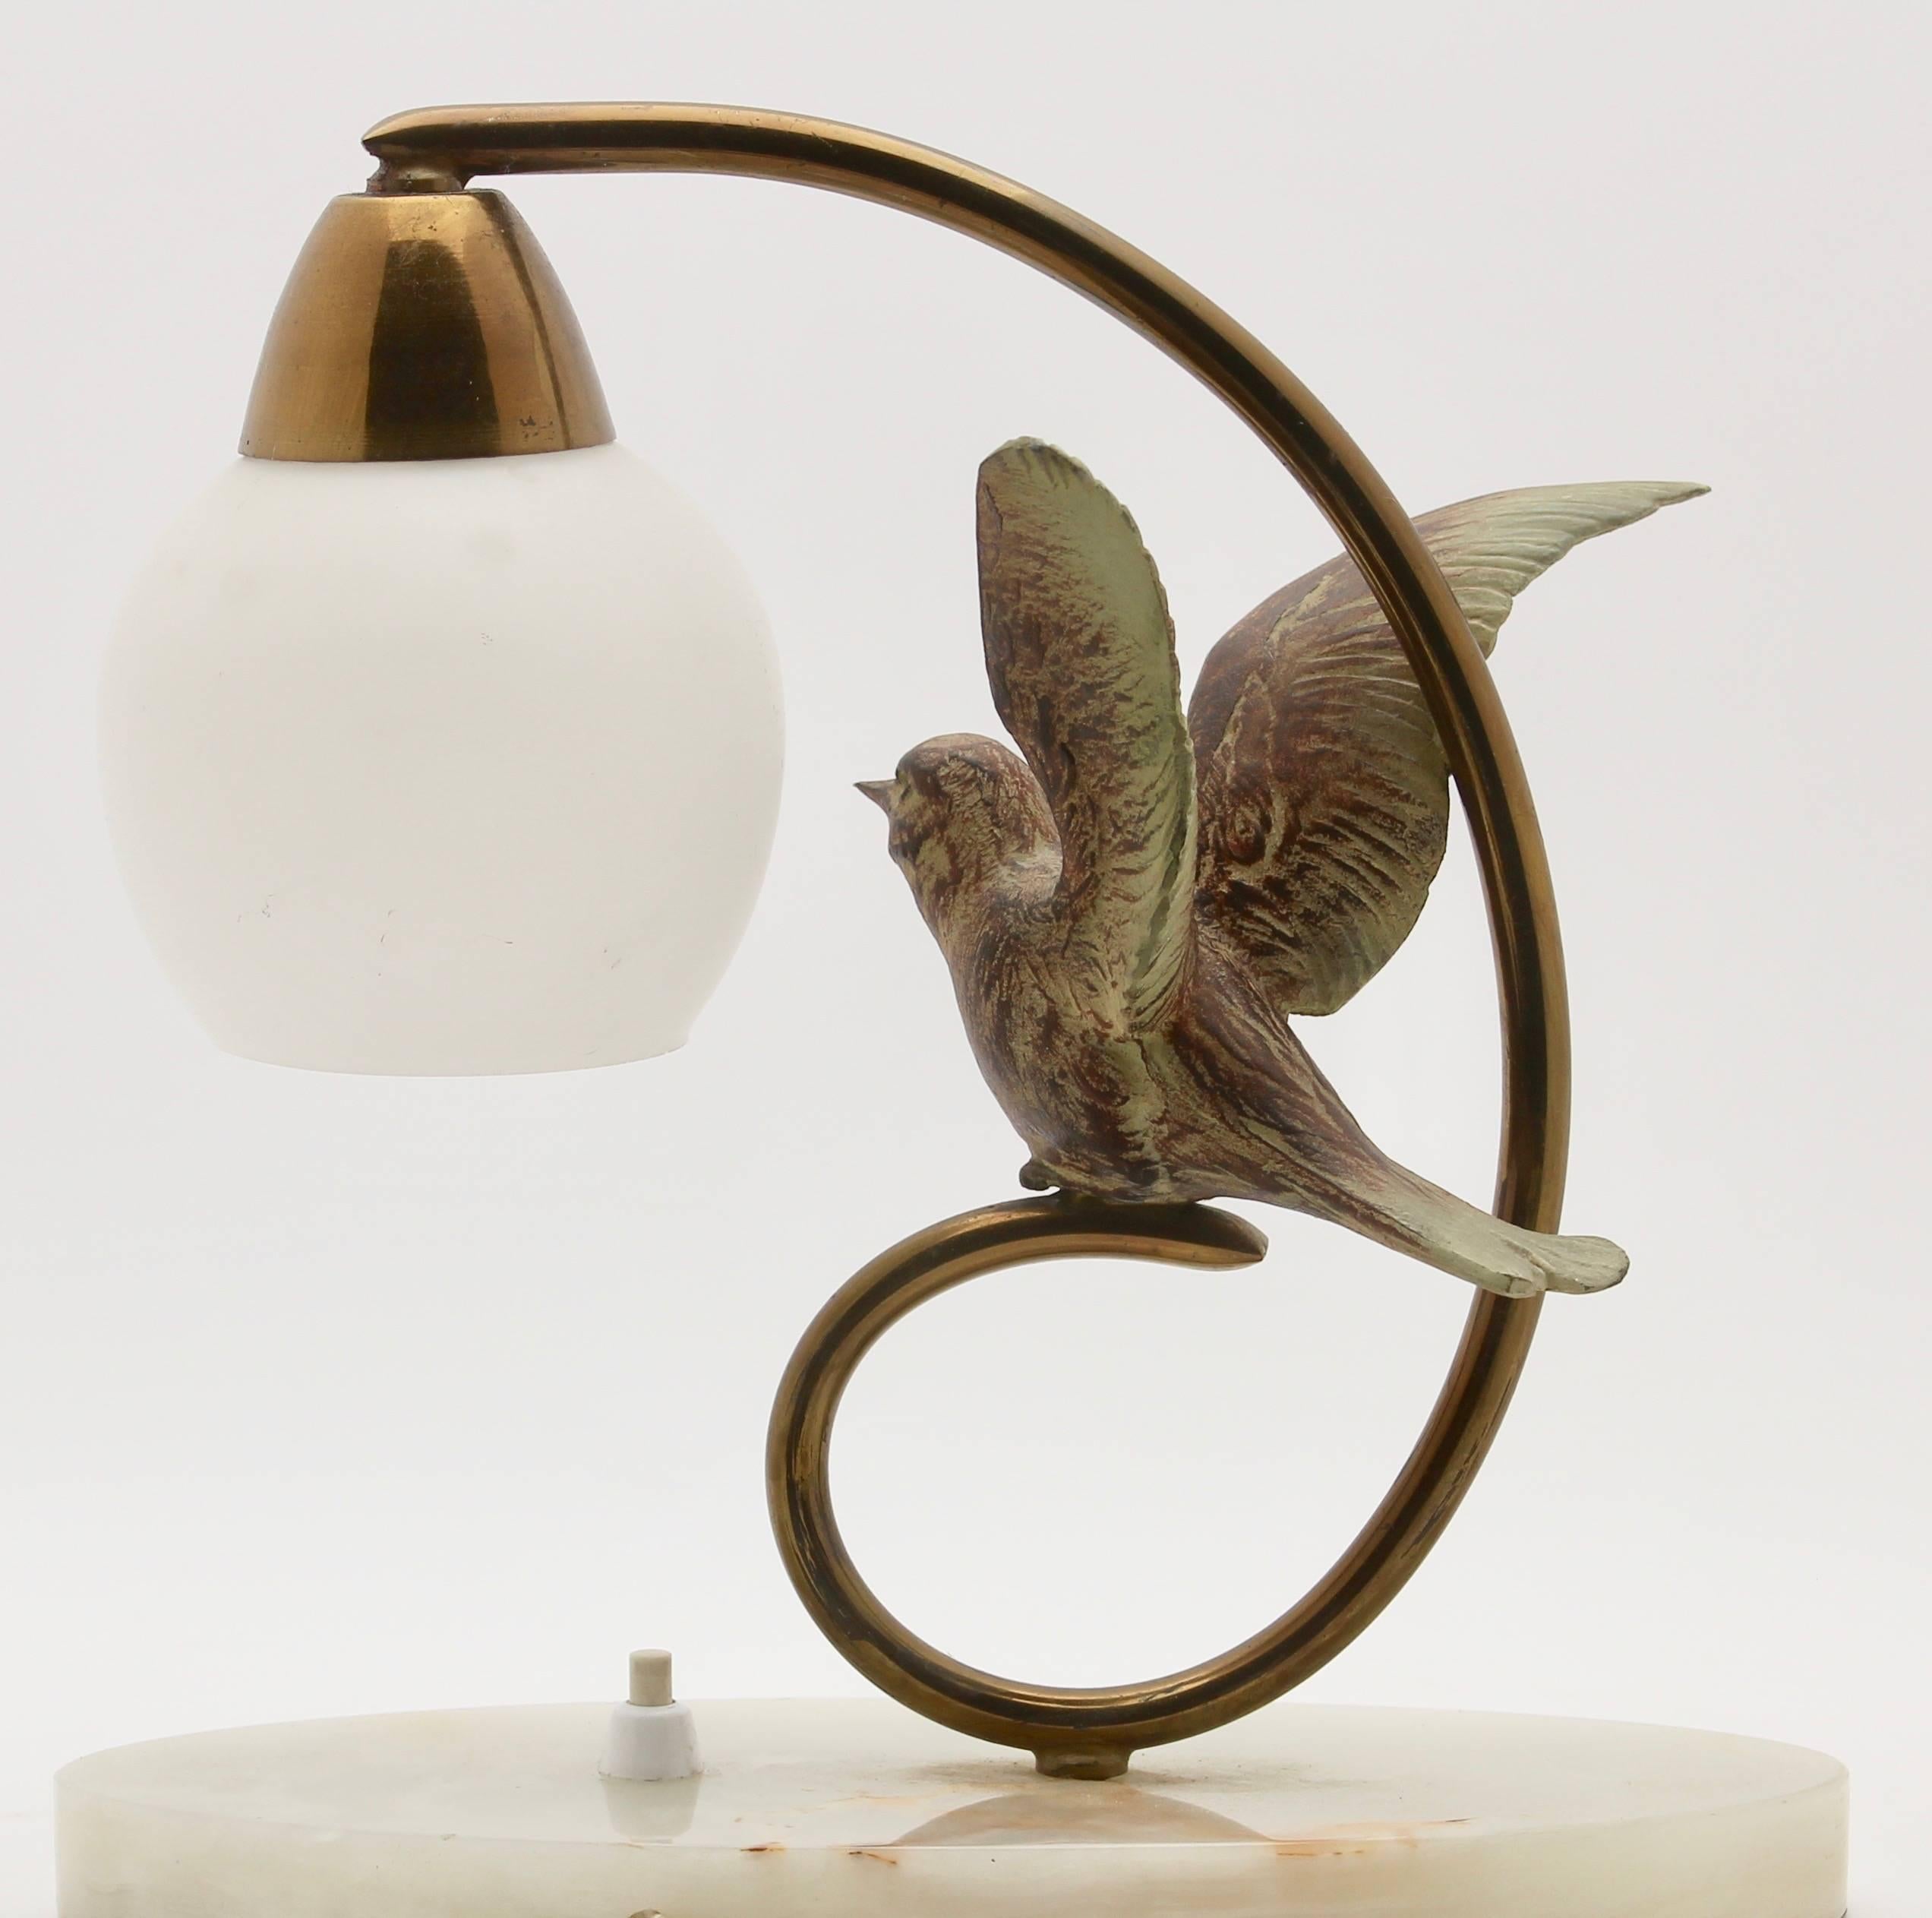 Brass Art Deco Table Lamp with Bird Made of Bronze on Base of Alabaster, Label Prolux